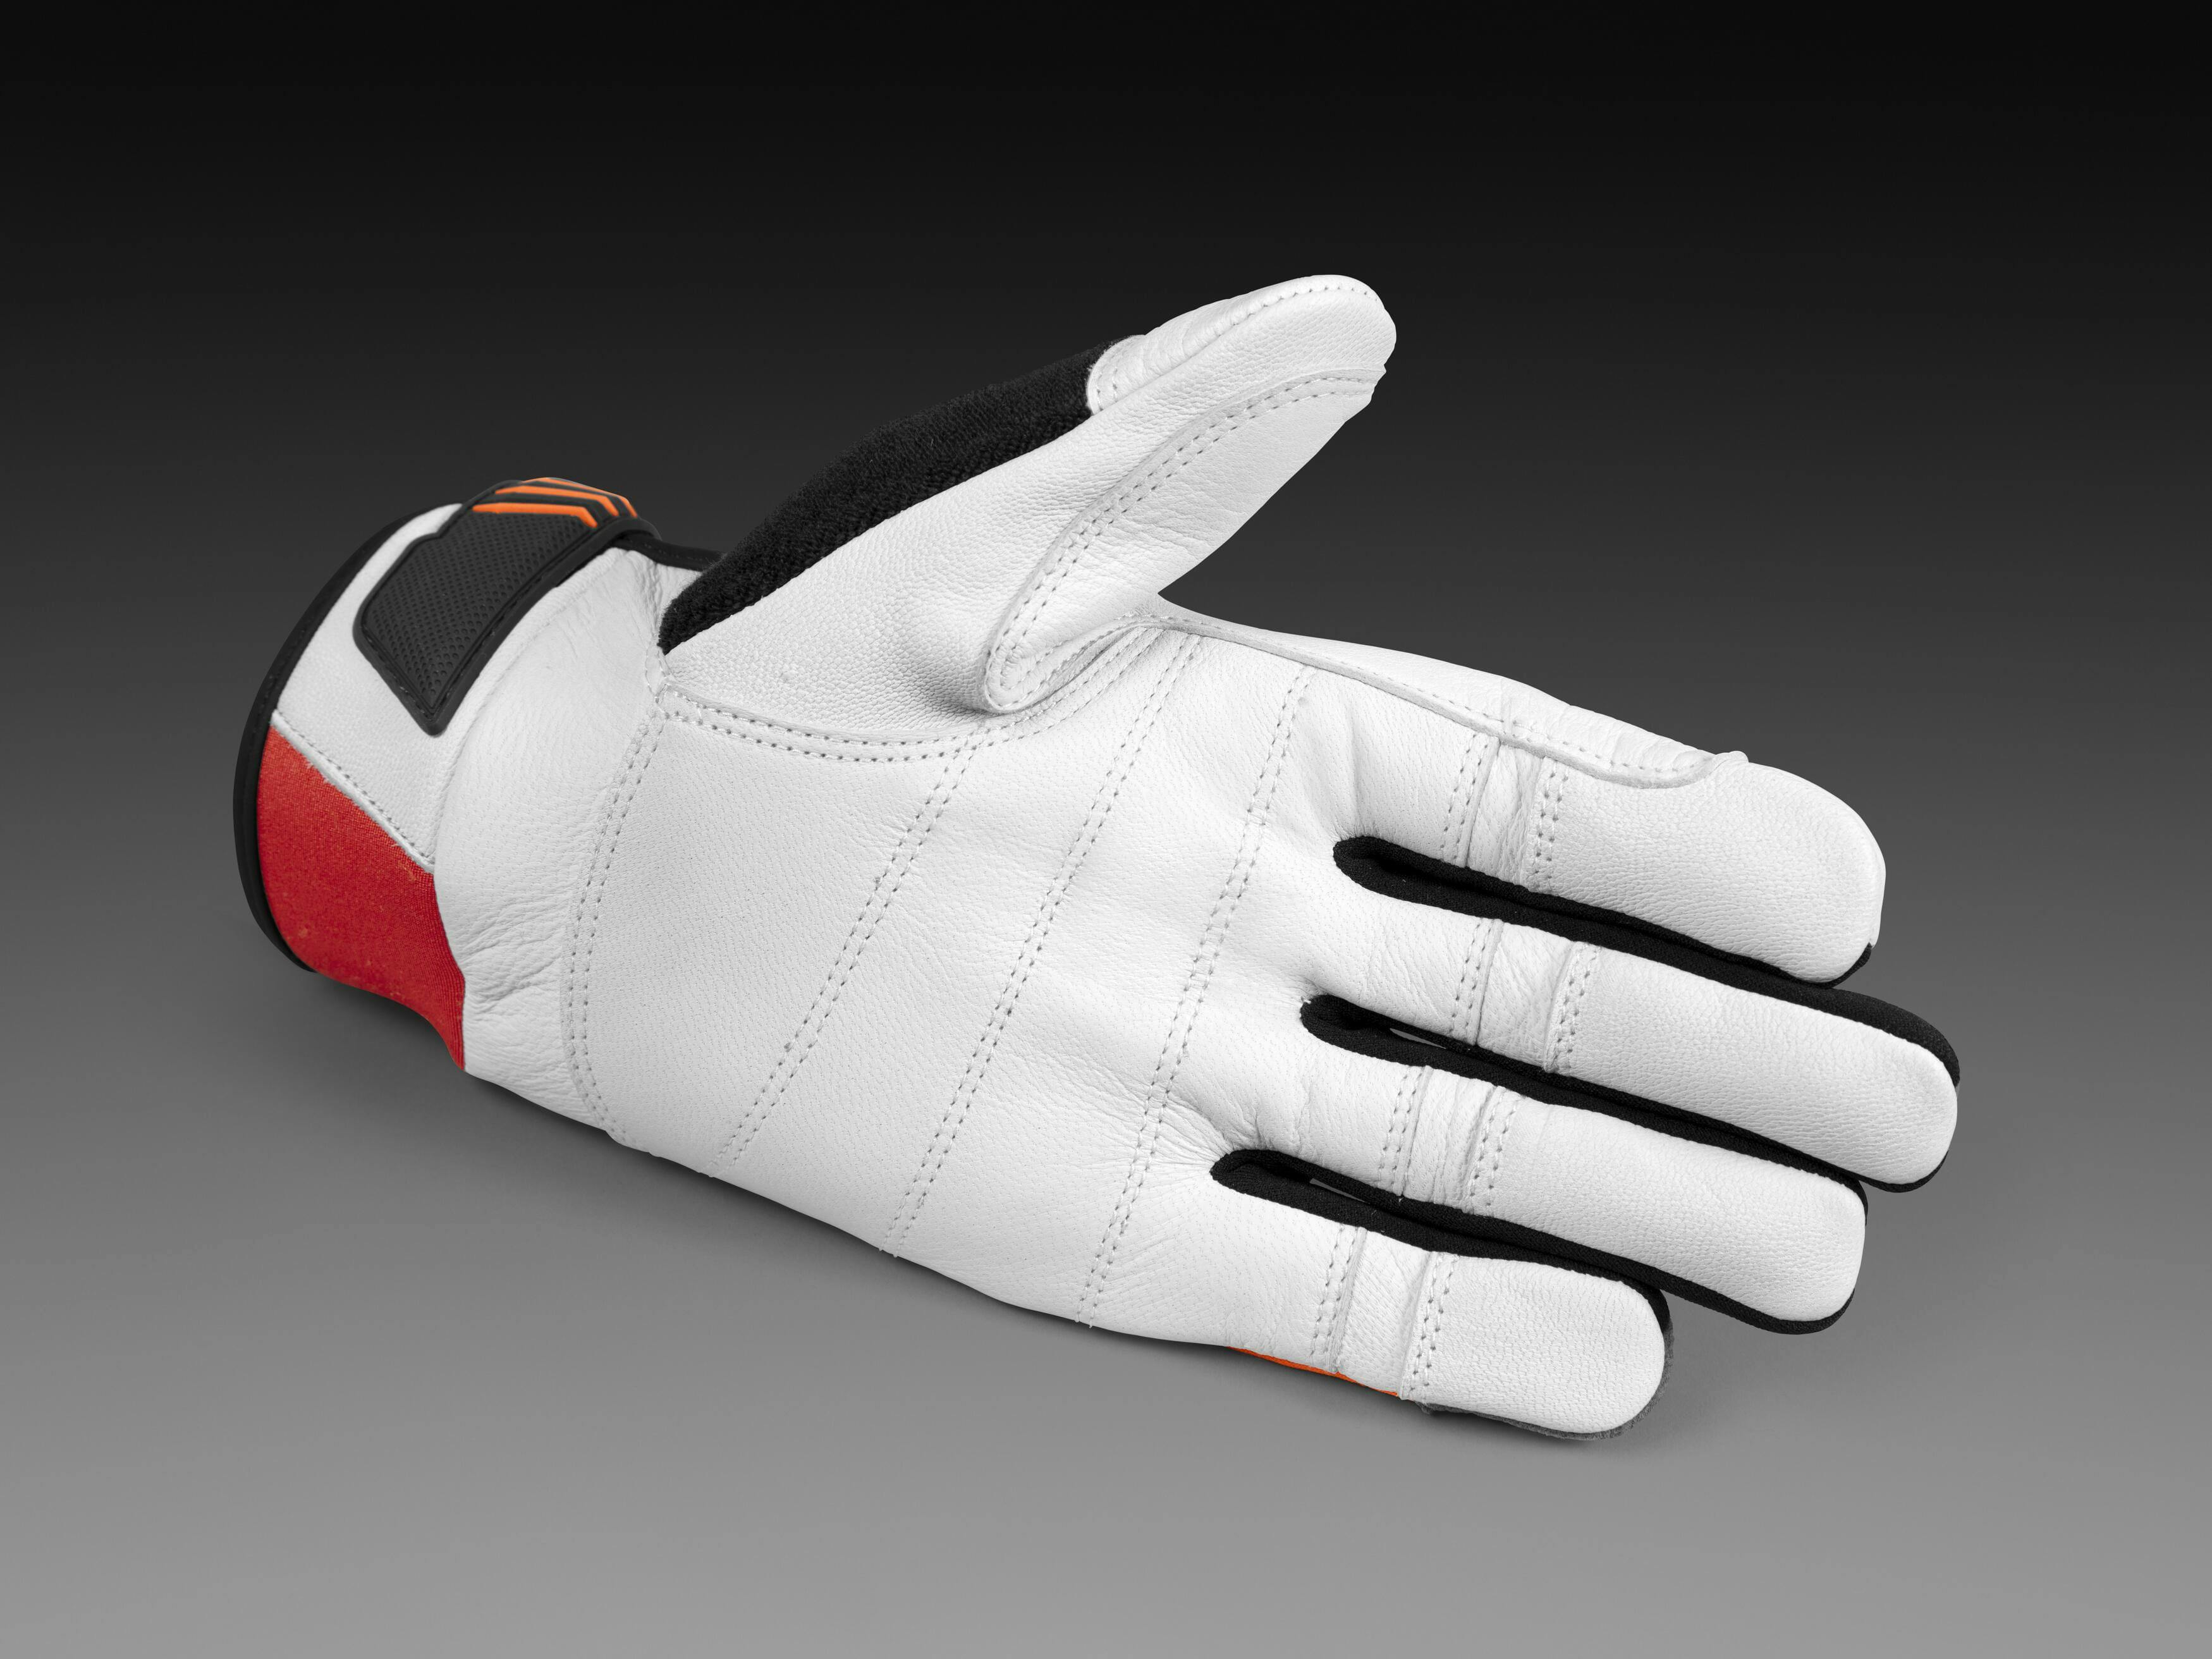 Gloves, Technical with saw protection image 2